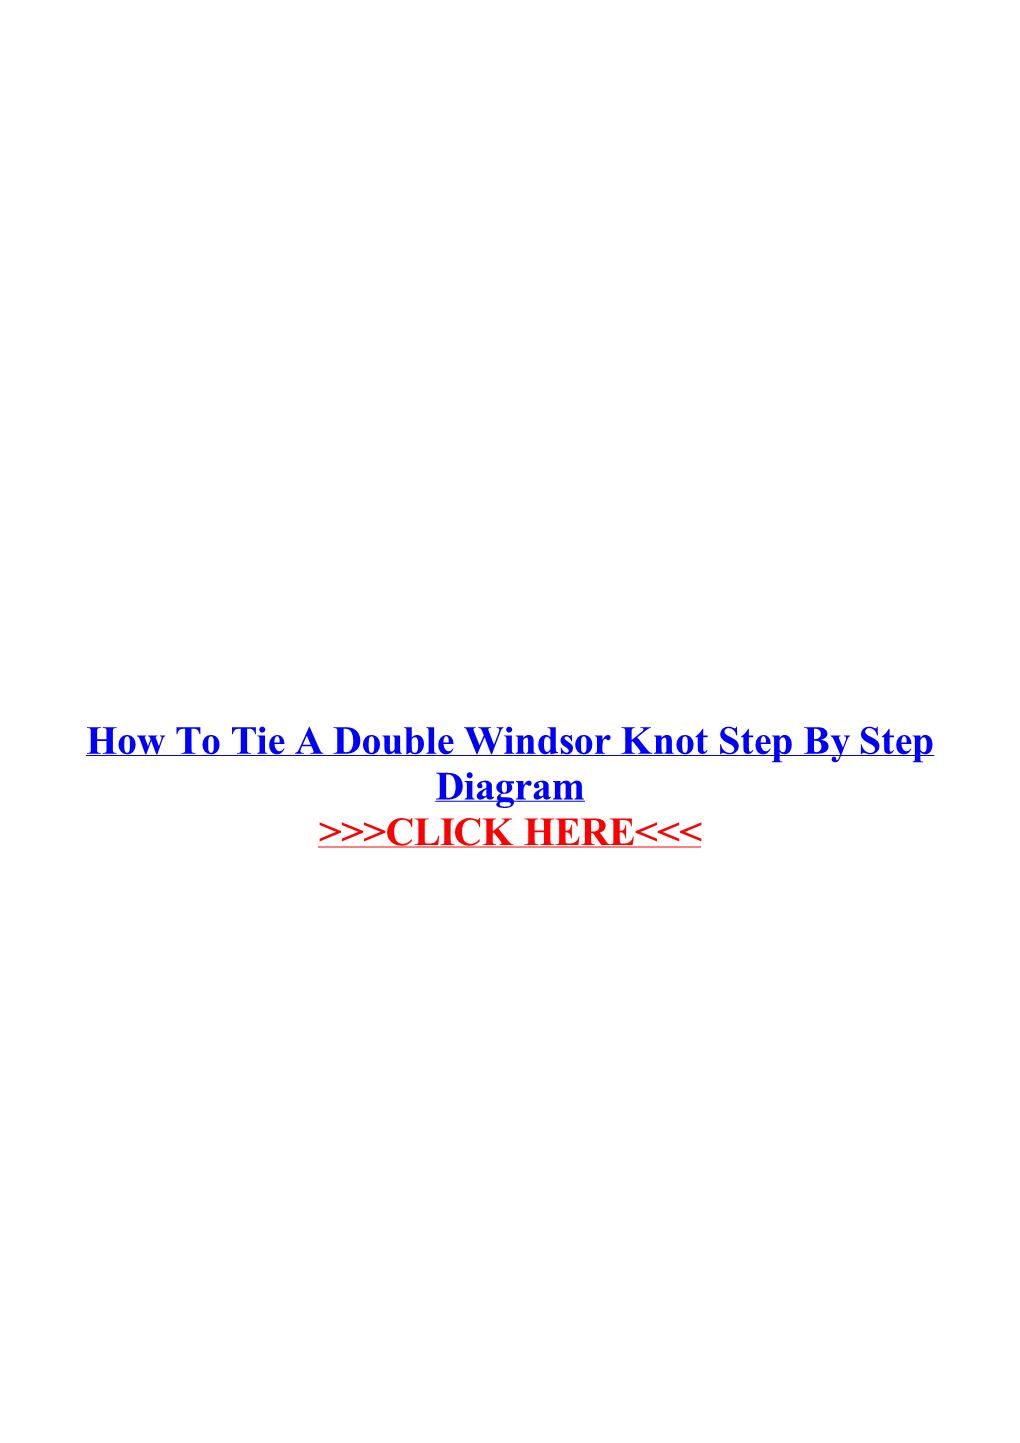 How to Tie a Double Windsor Knot Step by Step Diagram